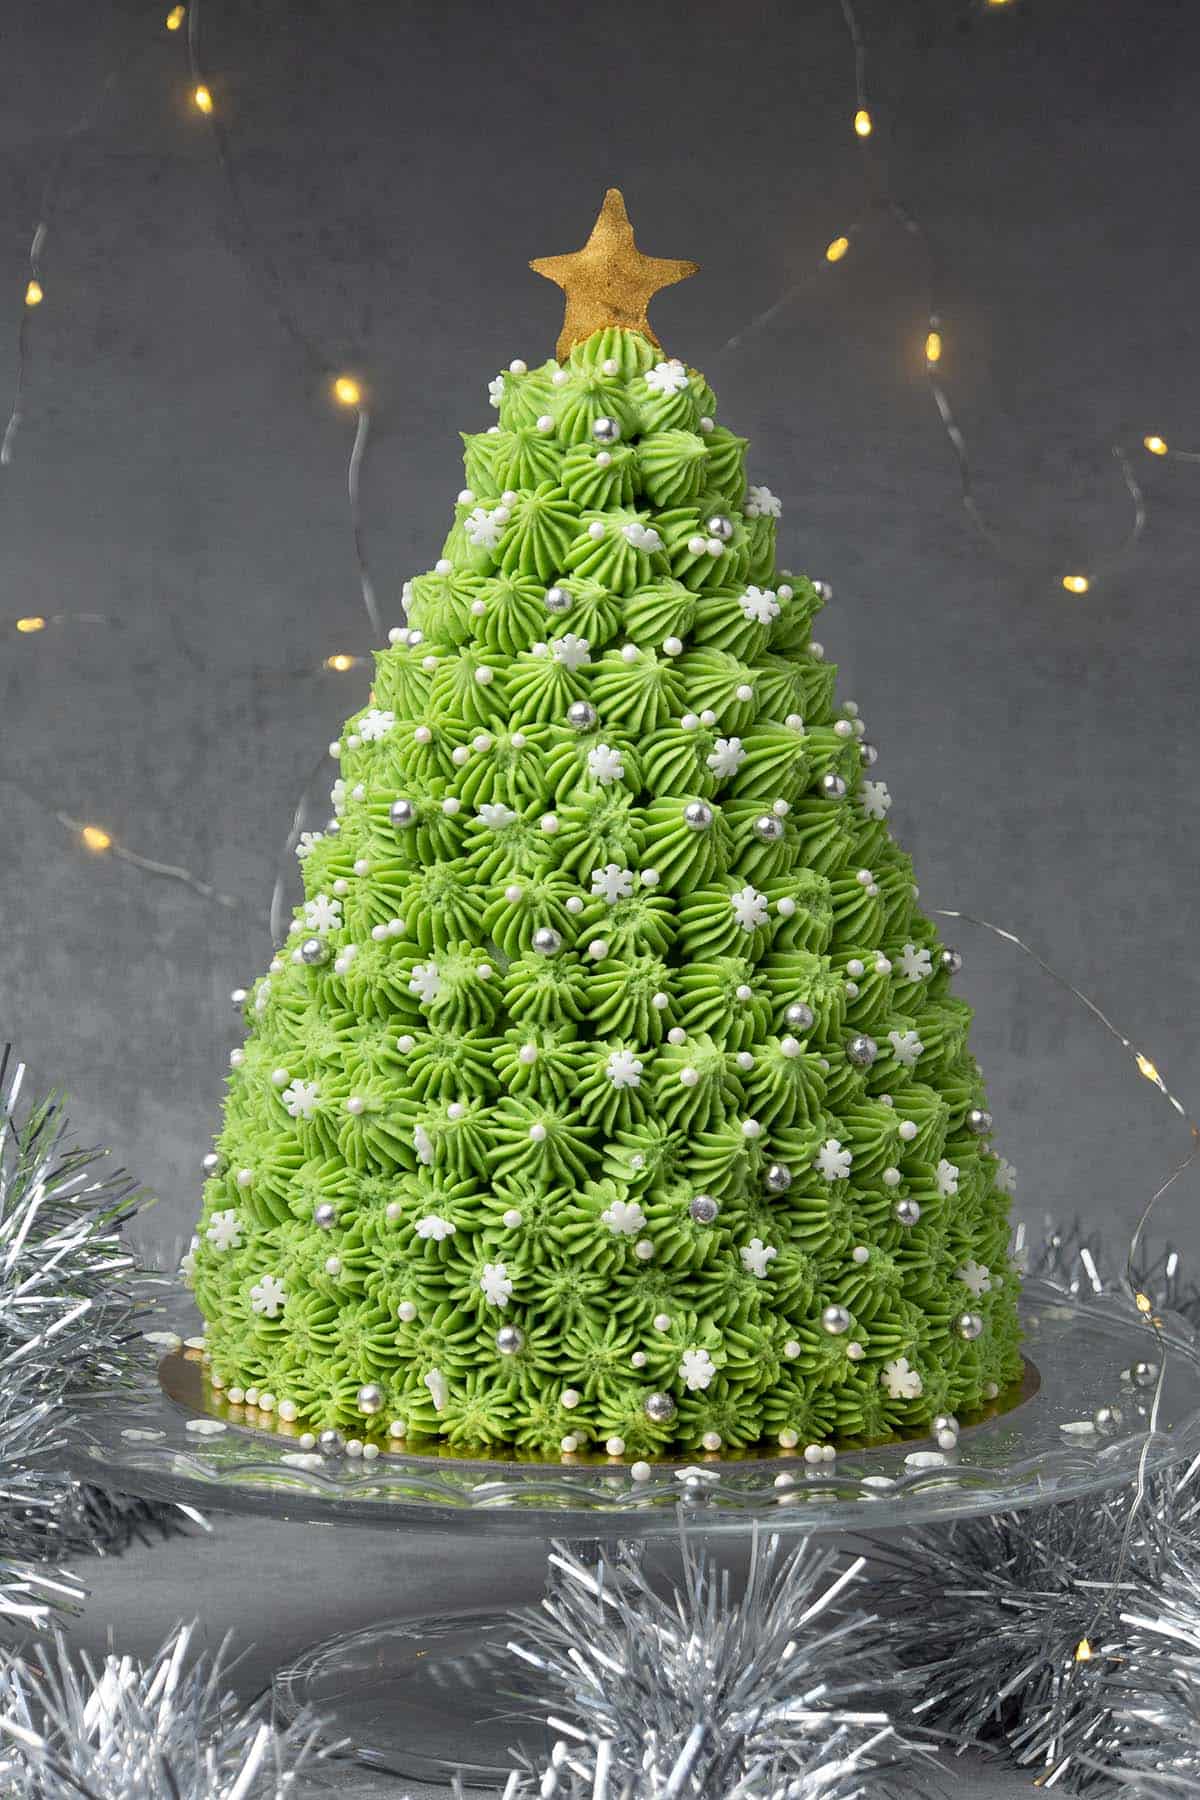 Christmas tree cake on a cake stand with lights in the background